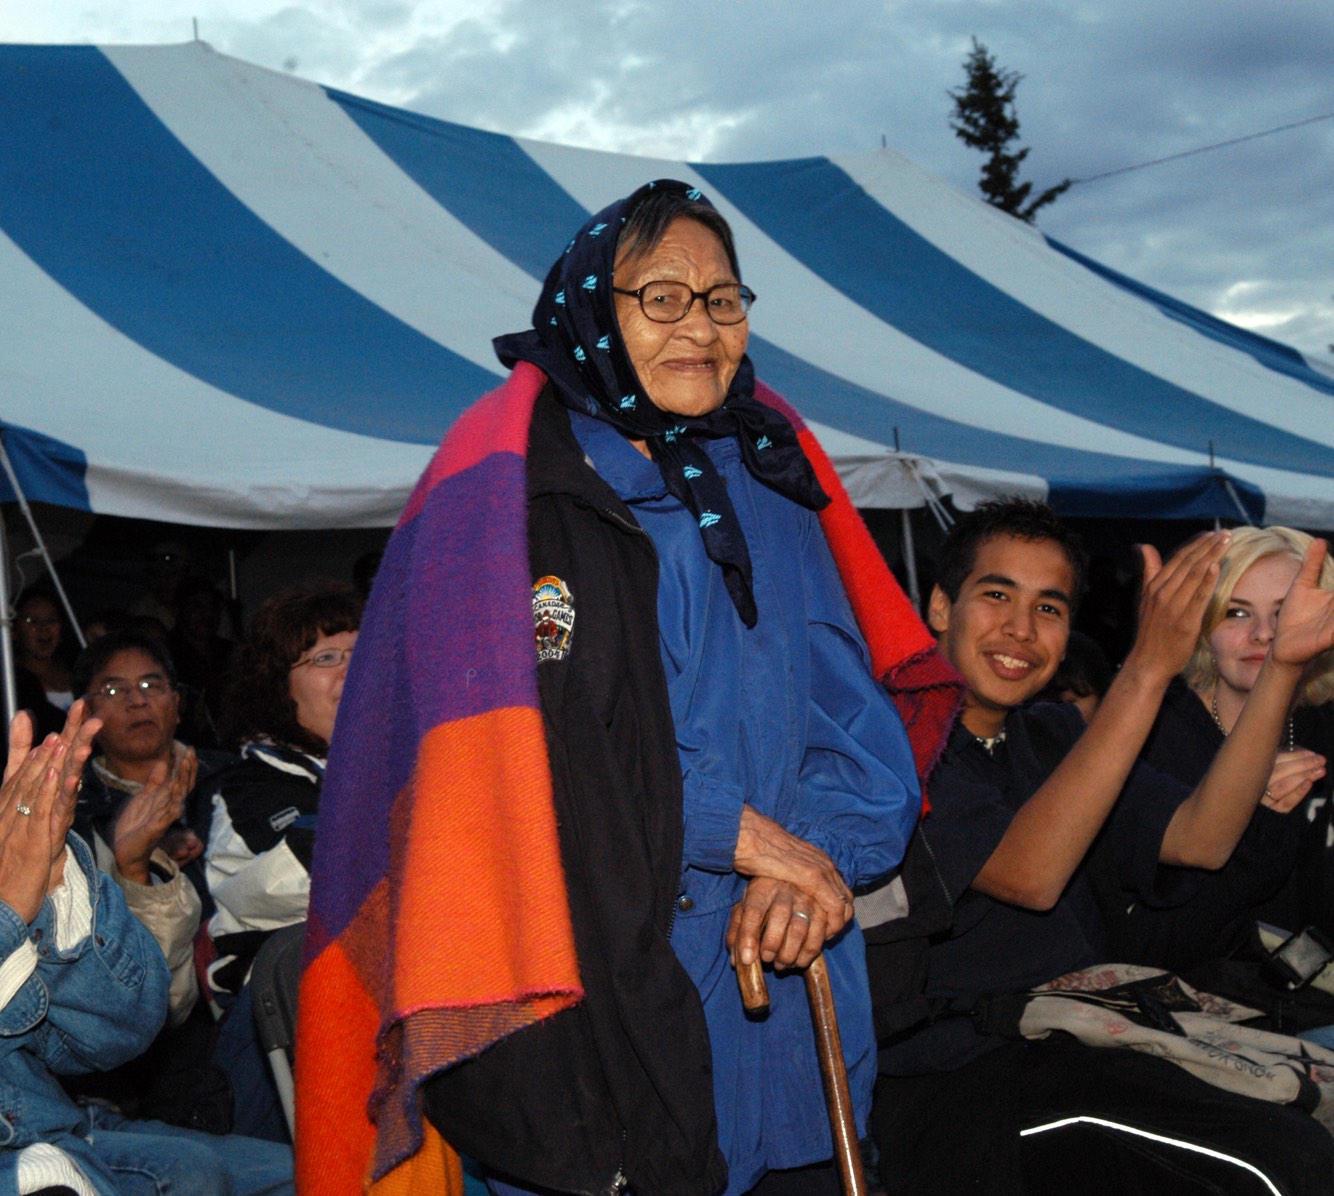 One key component of holistic learning involves the role of Elders in First Nation communities. Elders teach about responsibilities and relationships among family and community―reinforcing intergenerational connections and identities.